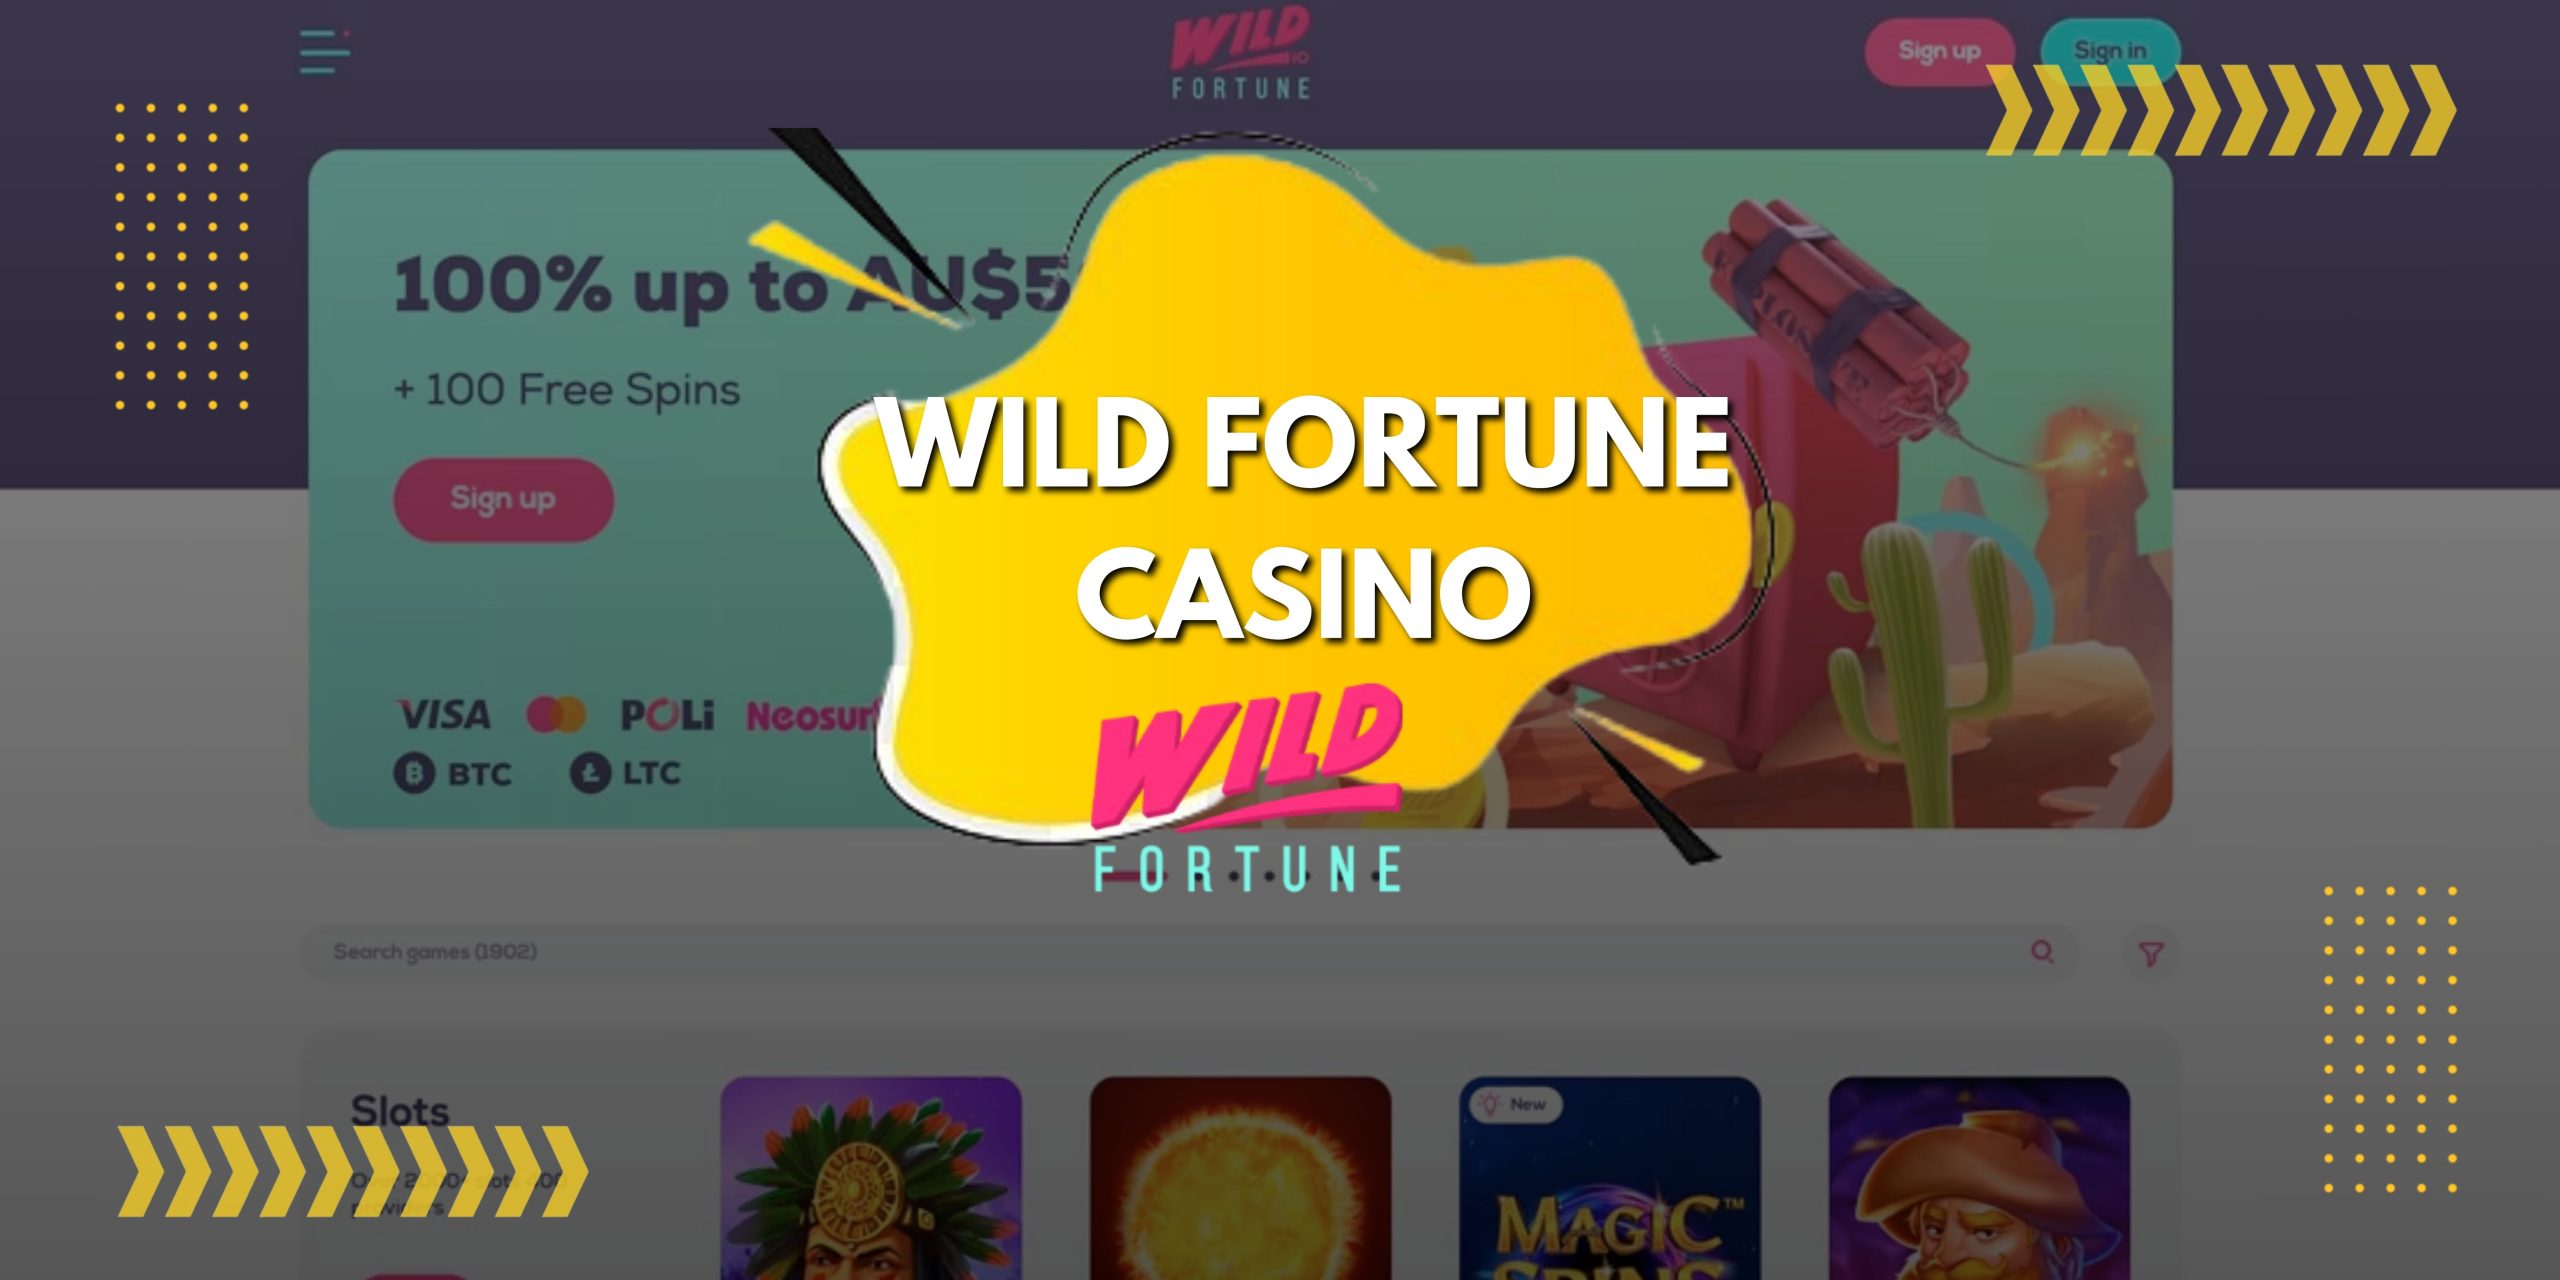 Wild Fortune Casino Review: Slot Machines, Bonuses, Licence, Payment Methods